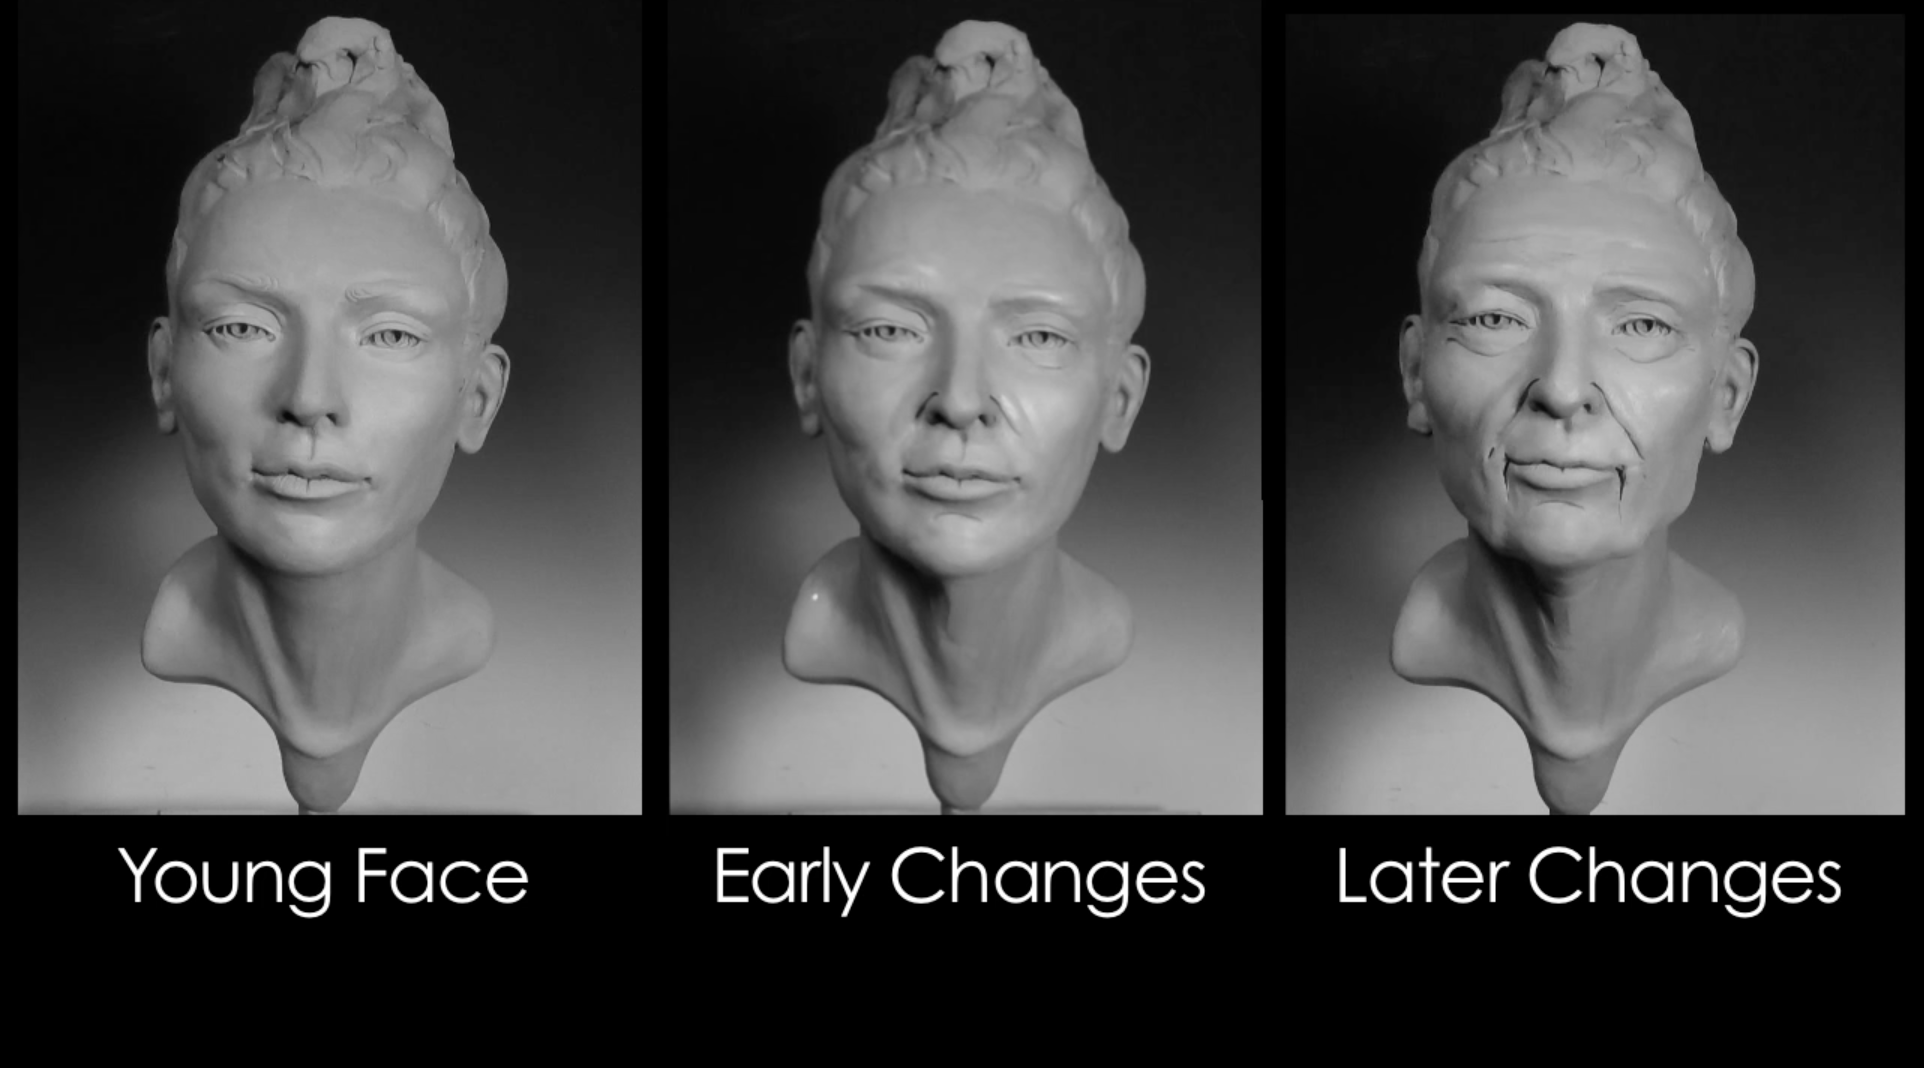 Video thumbnail of three clay sculptures of a woman showing different stages of aging